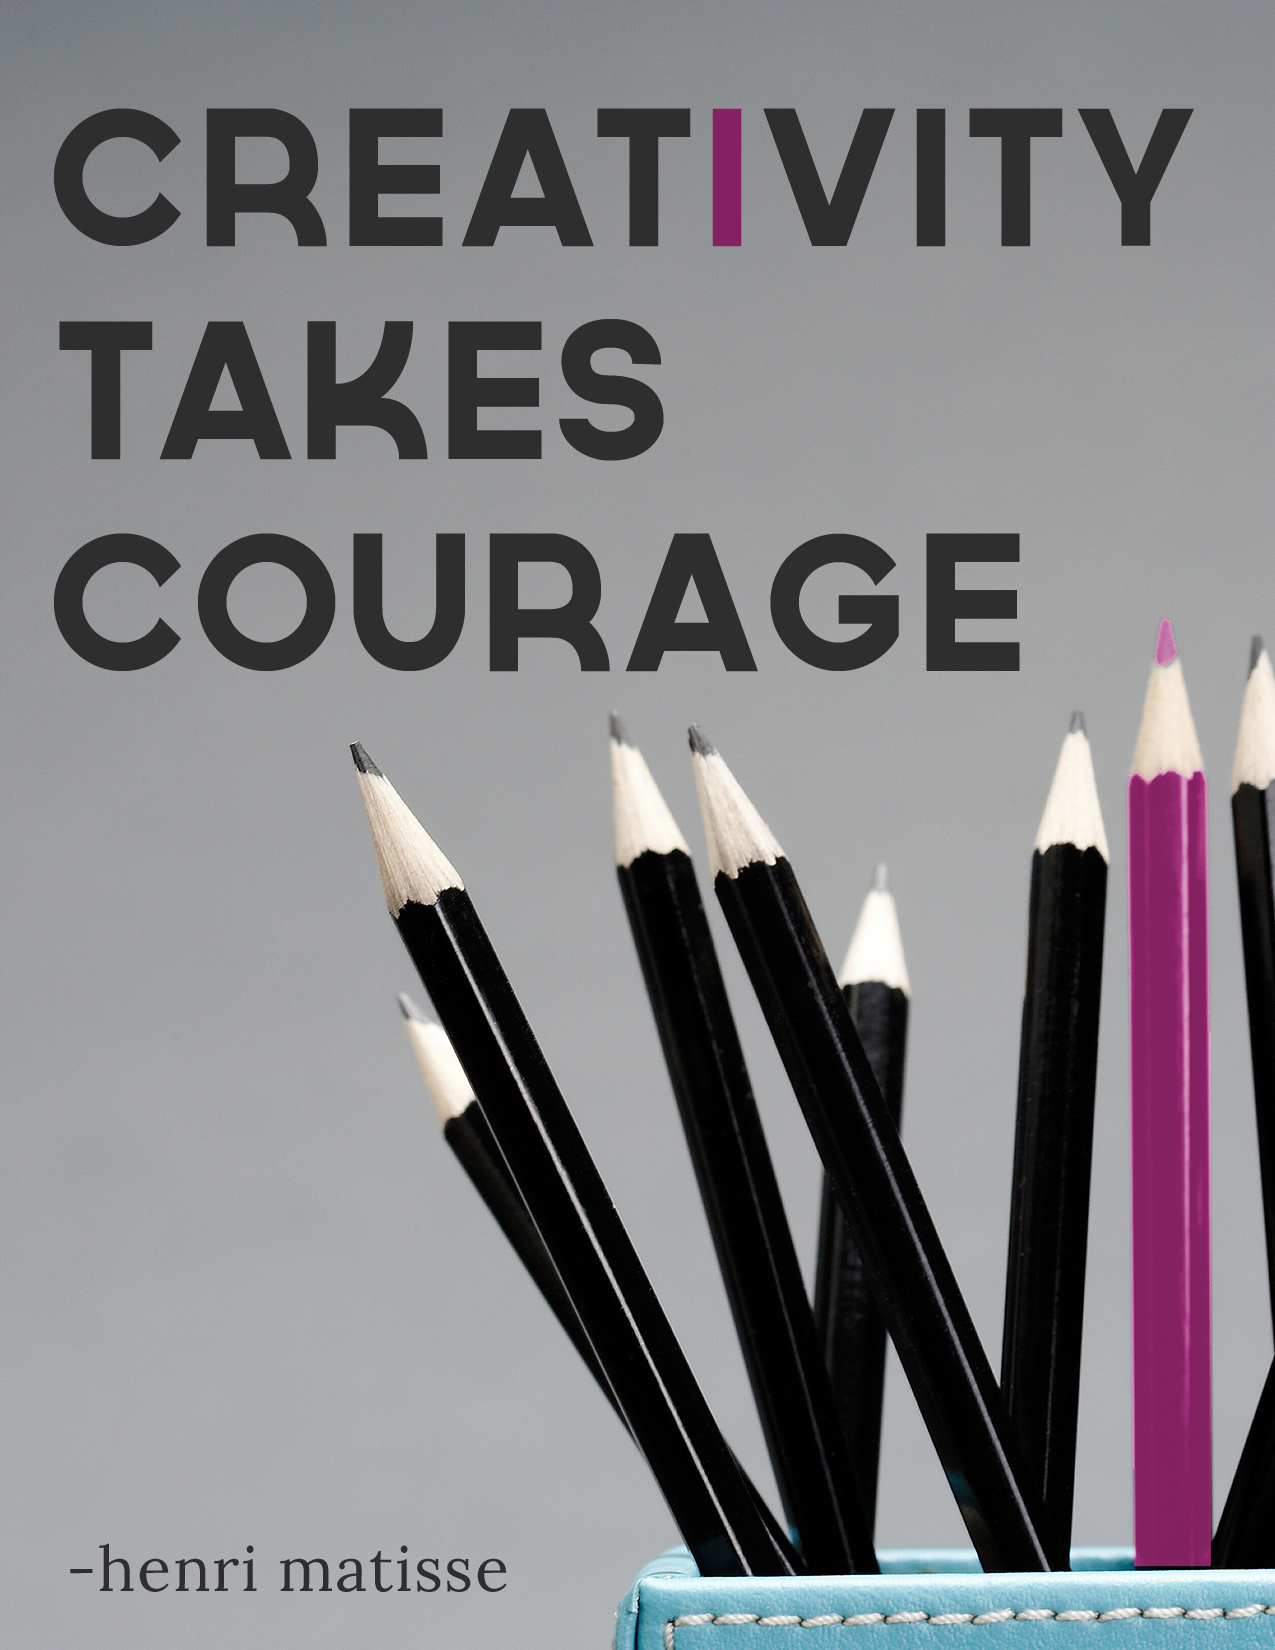 creativity in education quotes